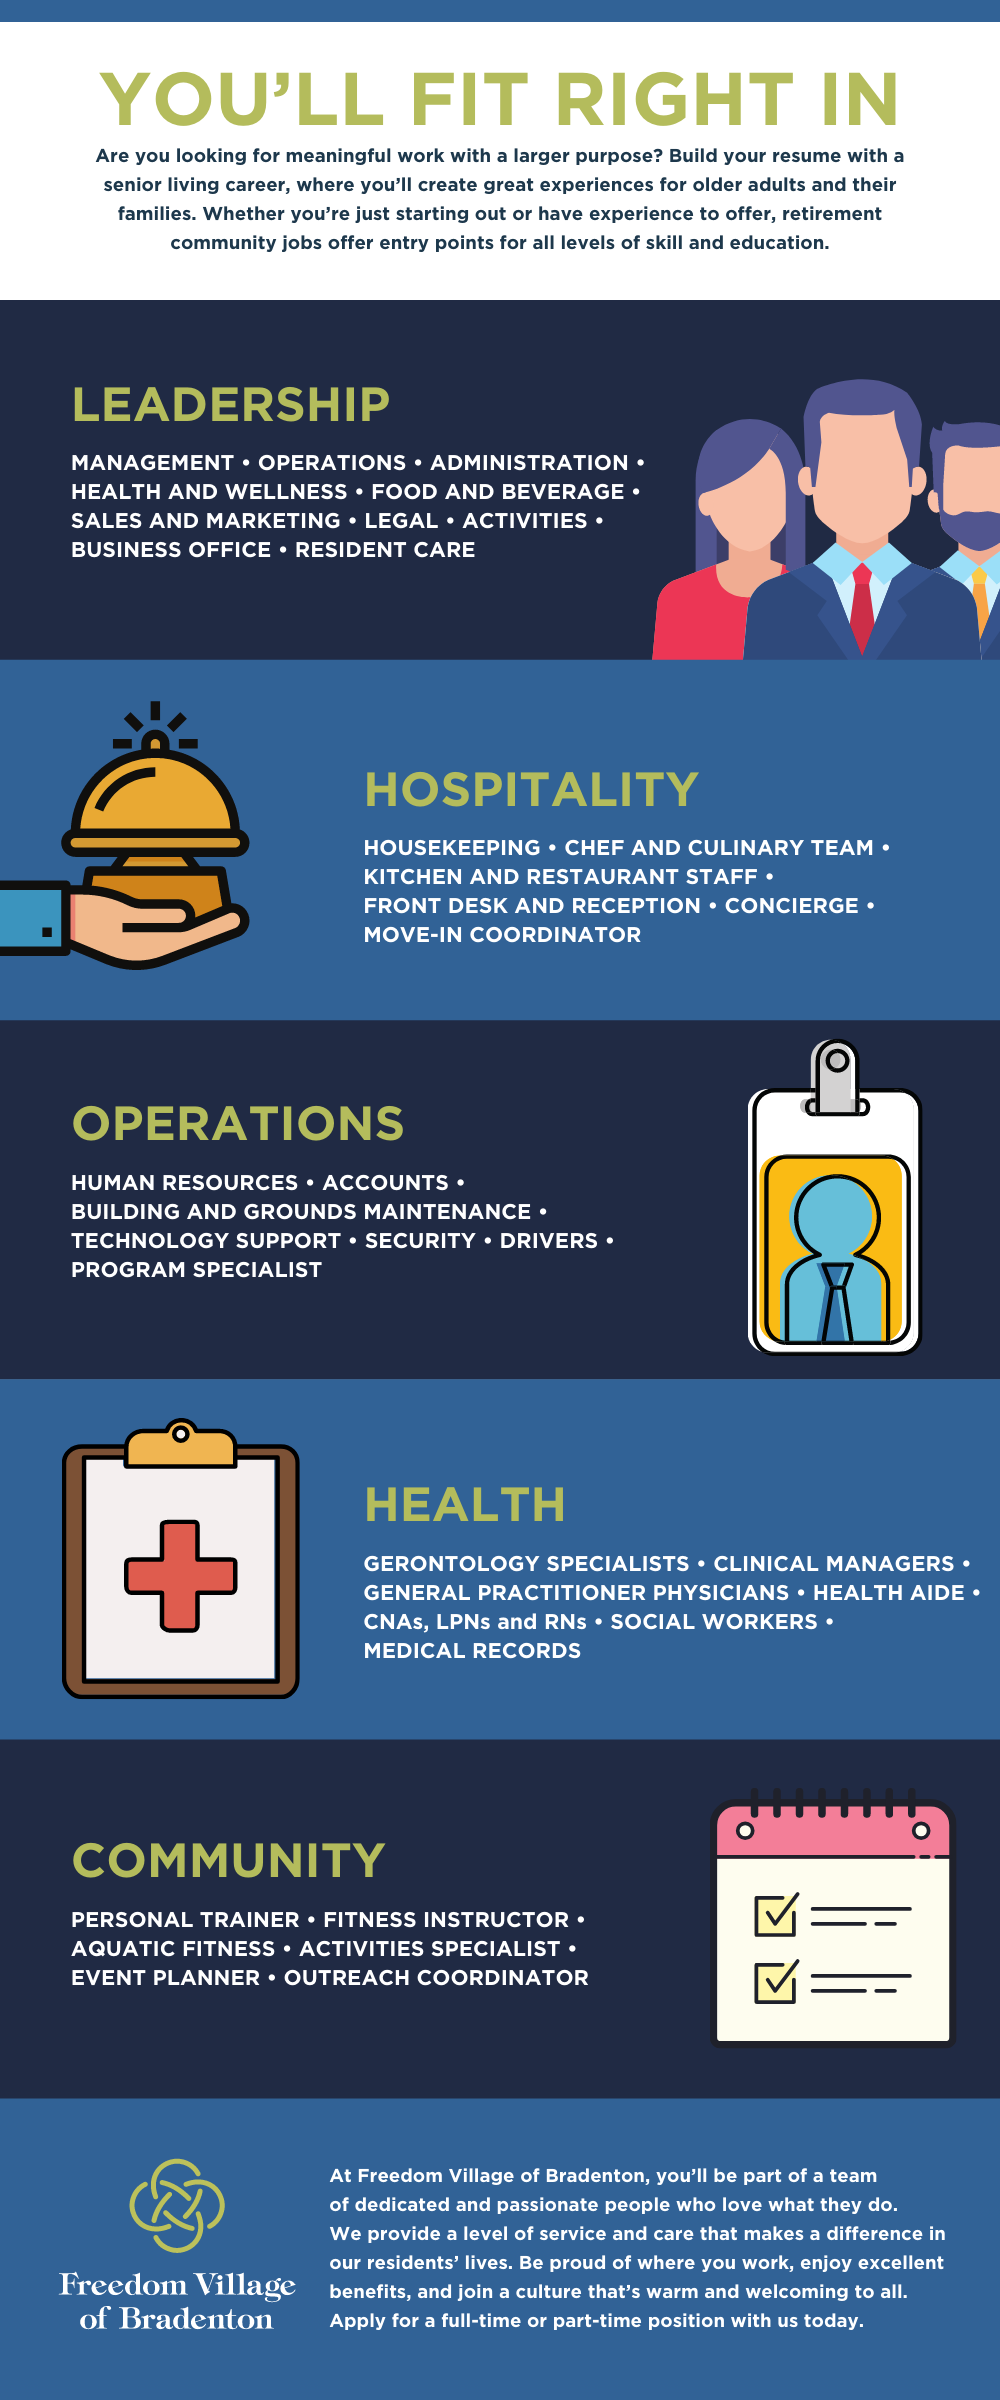 An infographic about the many different careers available at a senior living community